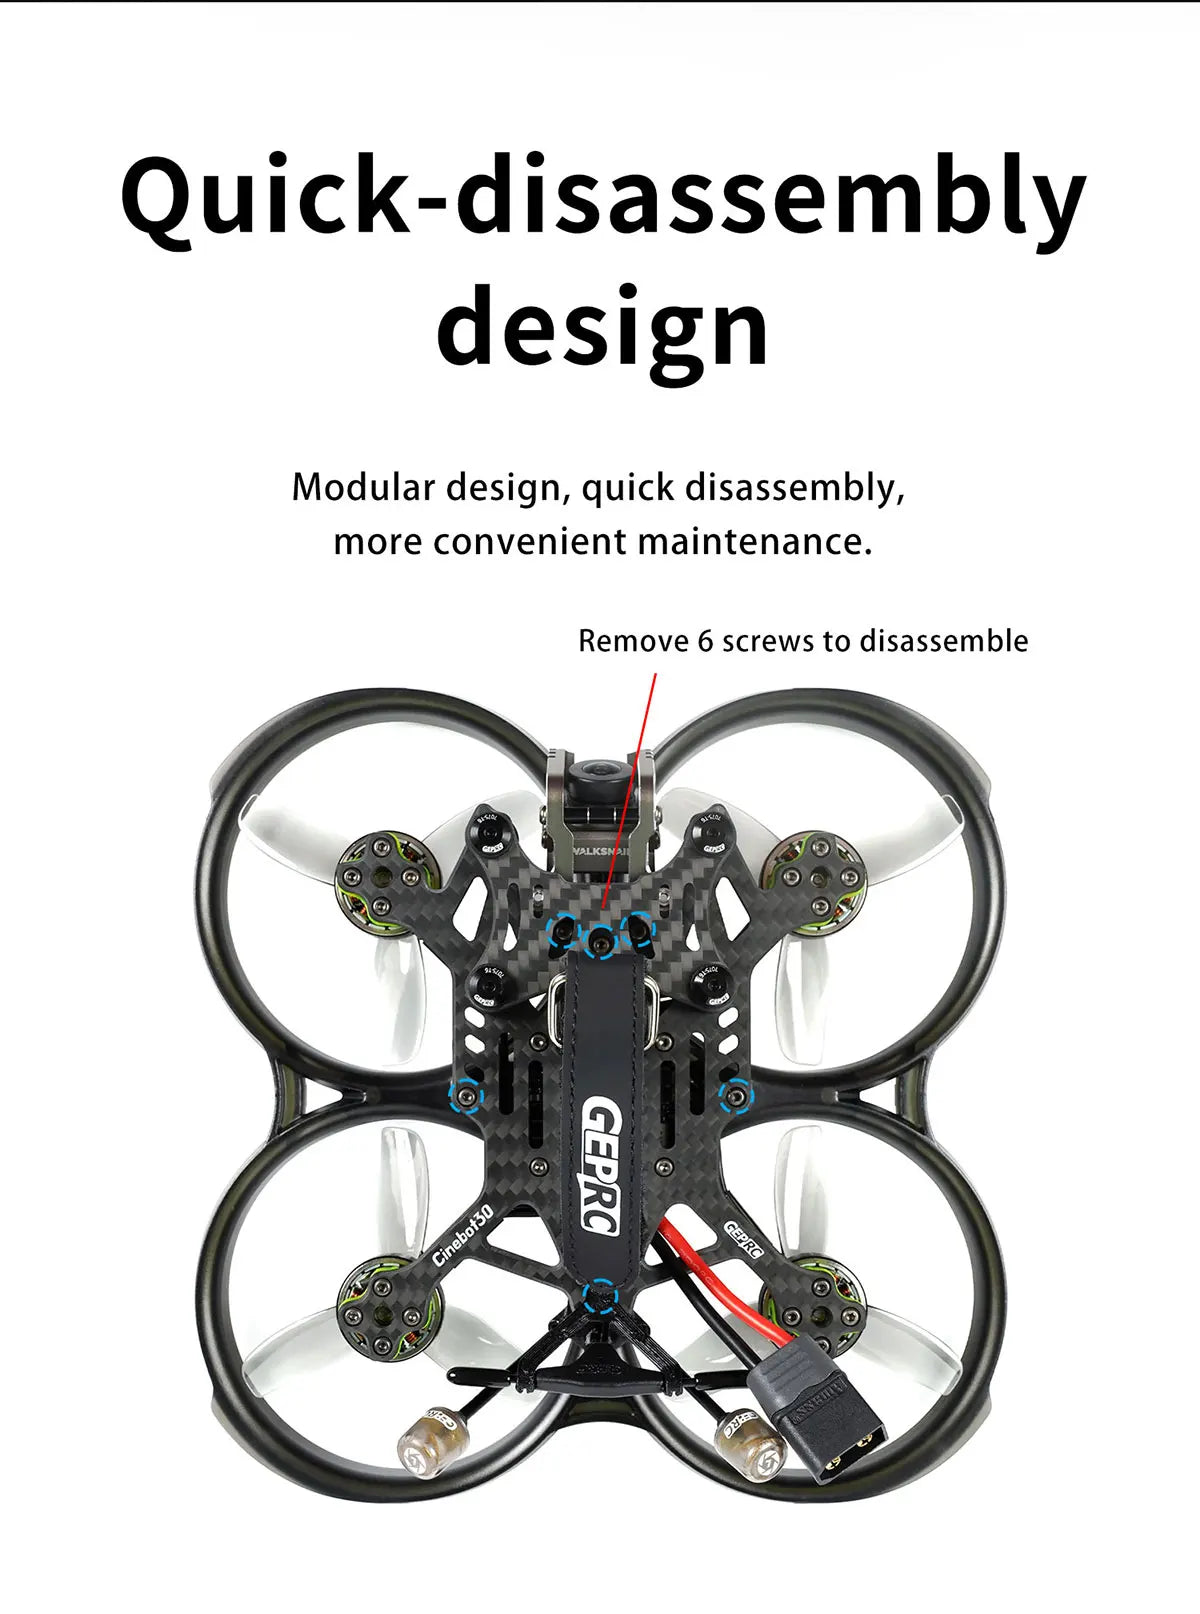 GEPRC Cinebot 30 FPV Drone, Quick-disassembly design Cinebot3o easy to disassemble 